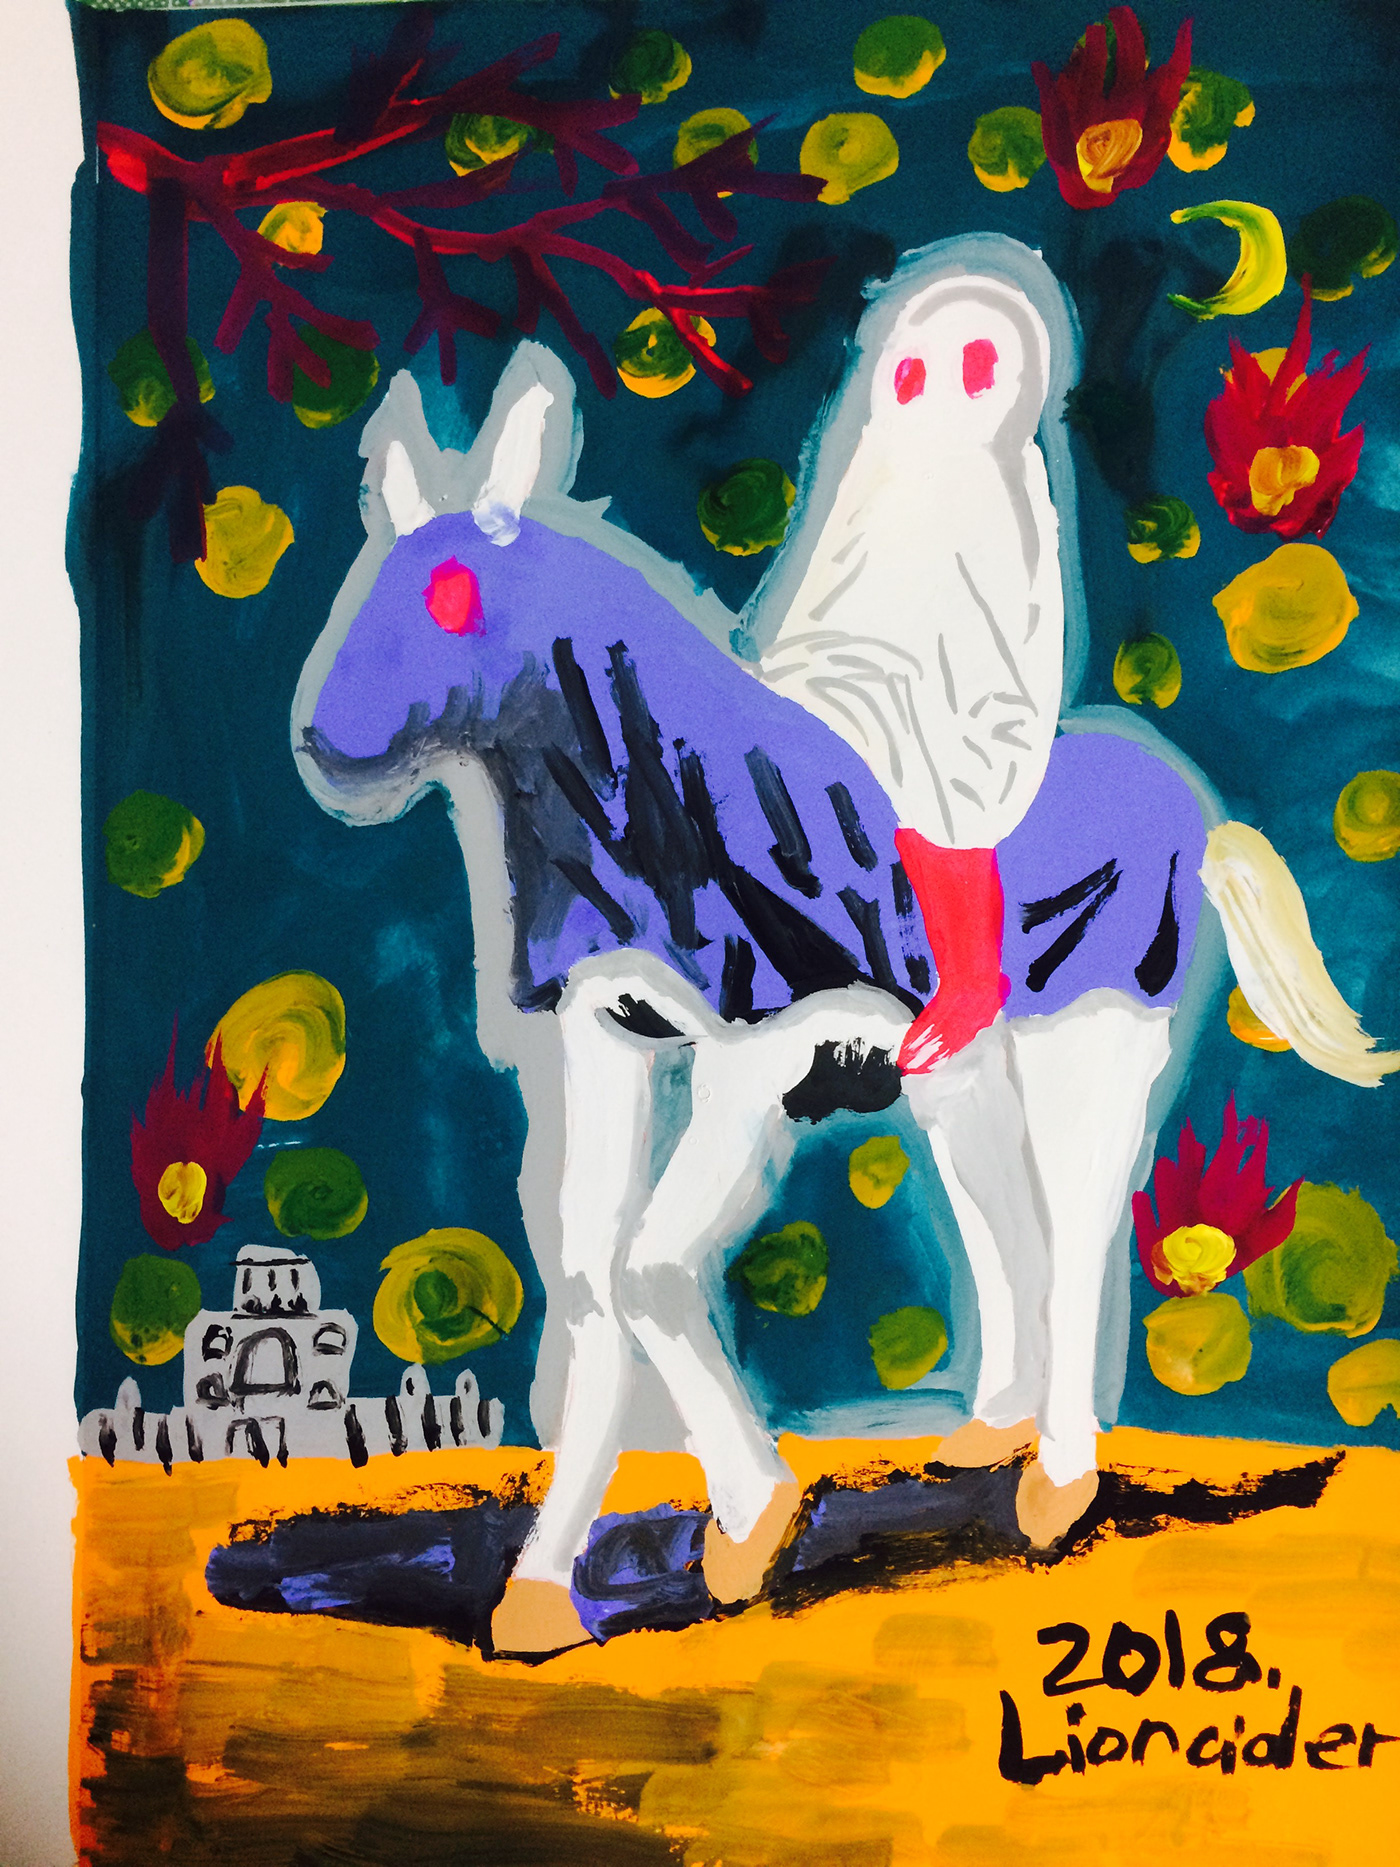 ILLUSTRATION  Drawing  Halloween ghost horse light image trick or treat night art colorful Acrylic paint pictures painting   artwork Illustrator